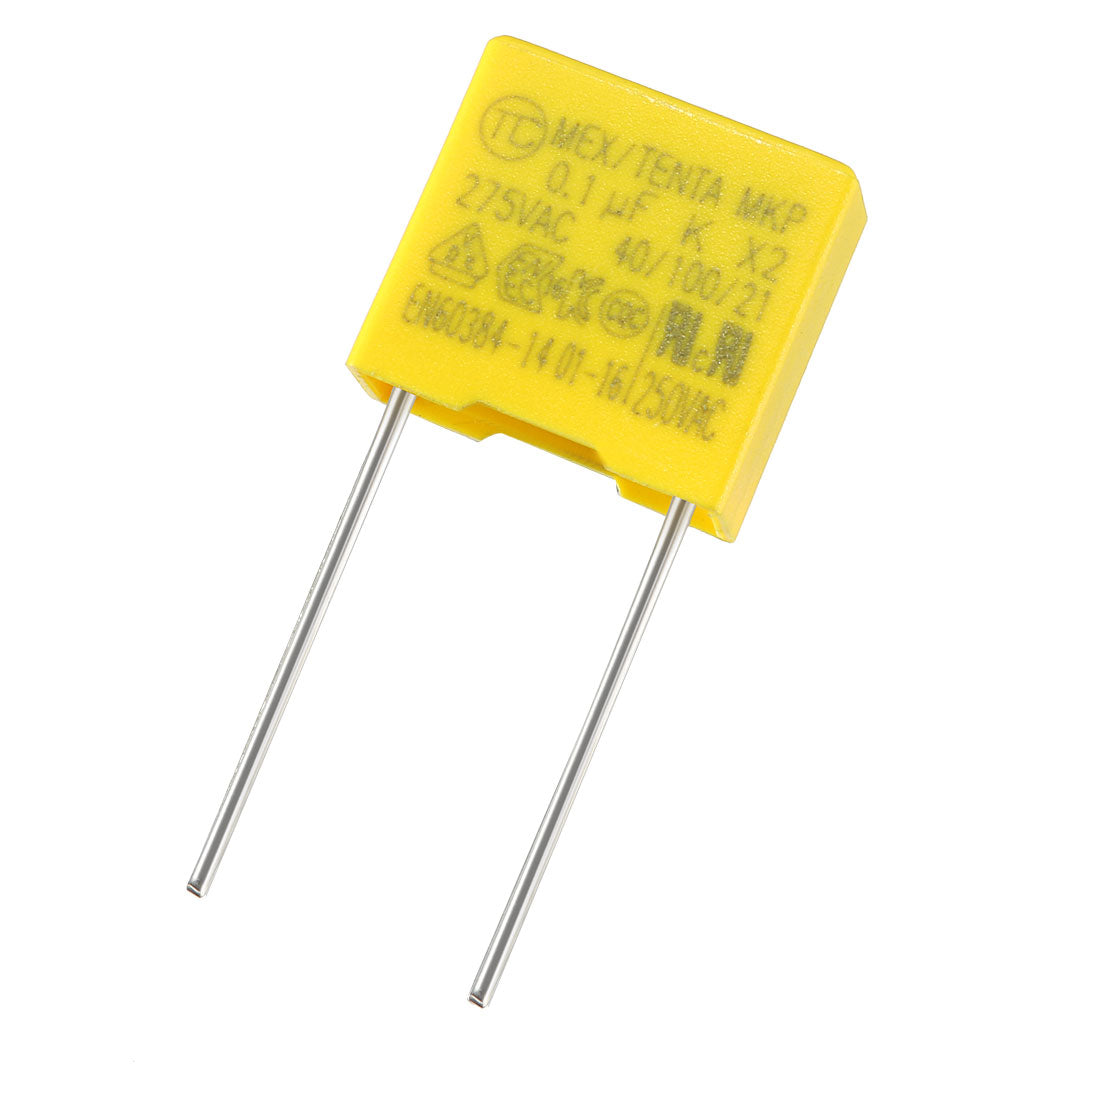 uxcell Uxcell Polypropylene Film Safety Capacitors 0.1uF 275VAC X2 MKP 20 Pcs